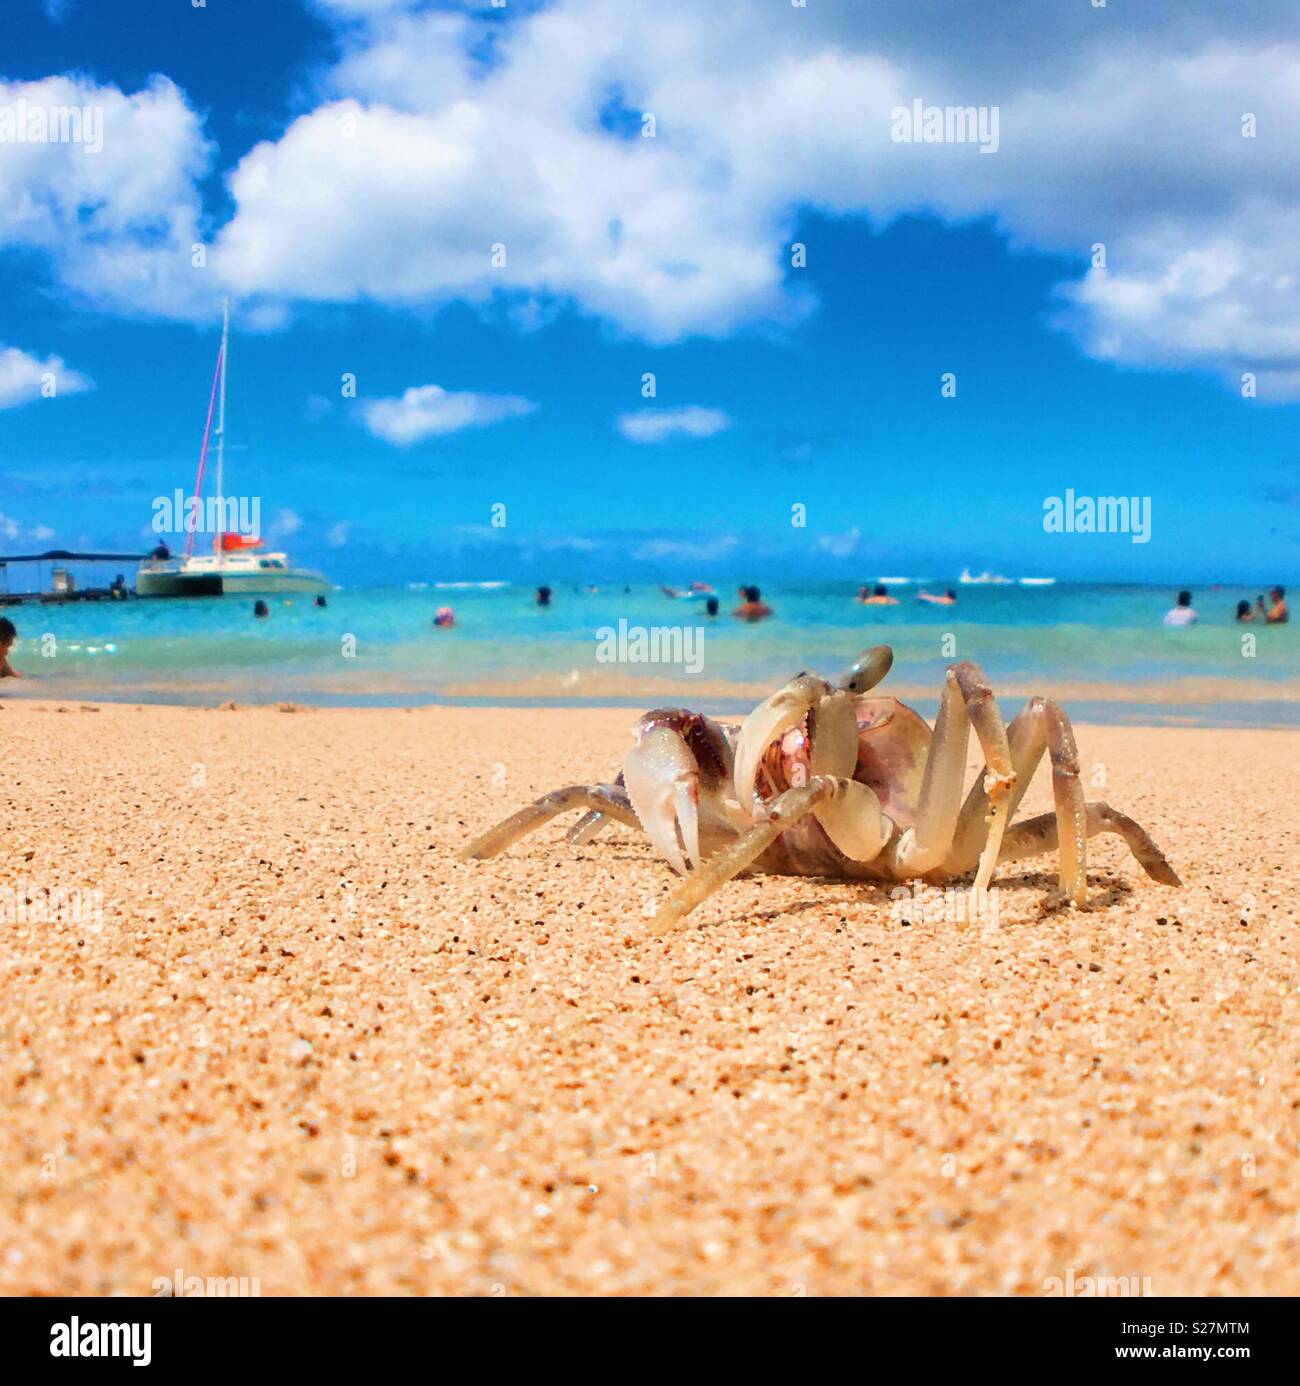 Crab on the beach with beach goers in the background. Square crop. Stock Photo